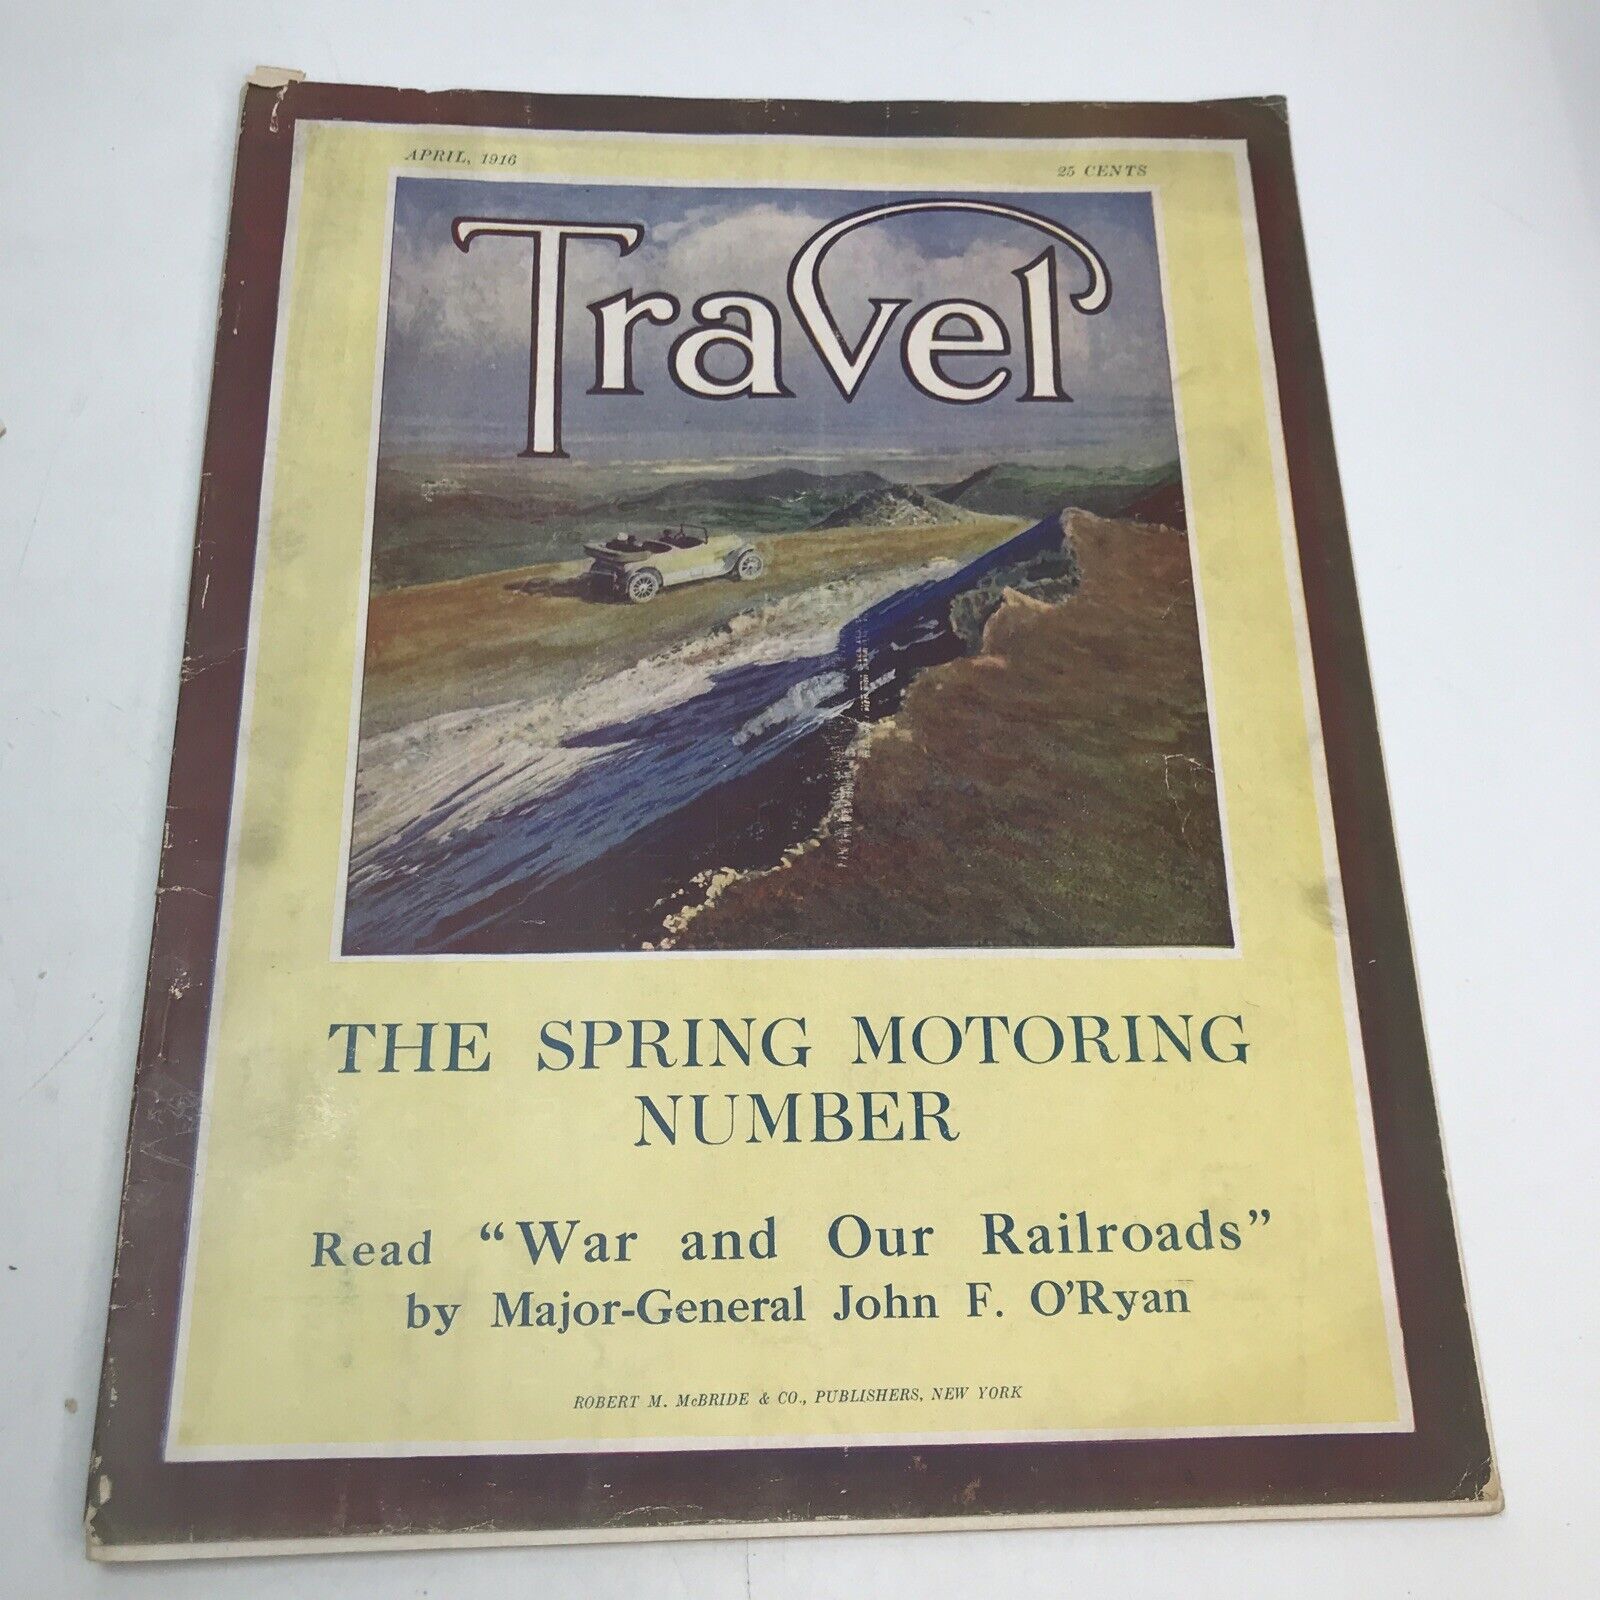 1916 AUTOMOBILE MOTORING TRAVEL MAGAZINE WAR AND OUR RAILROADS VINTAGE ADS